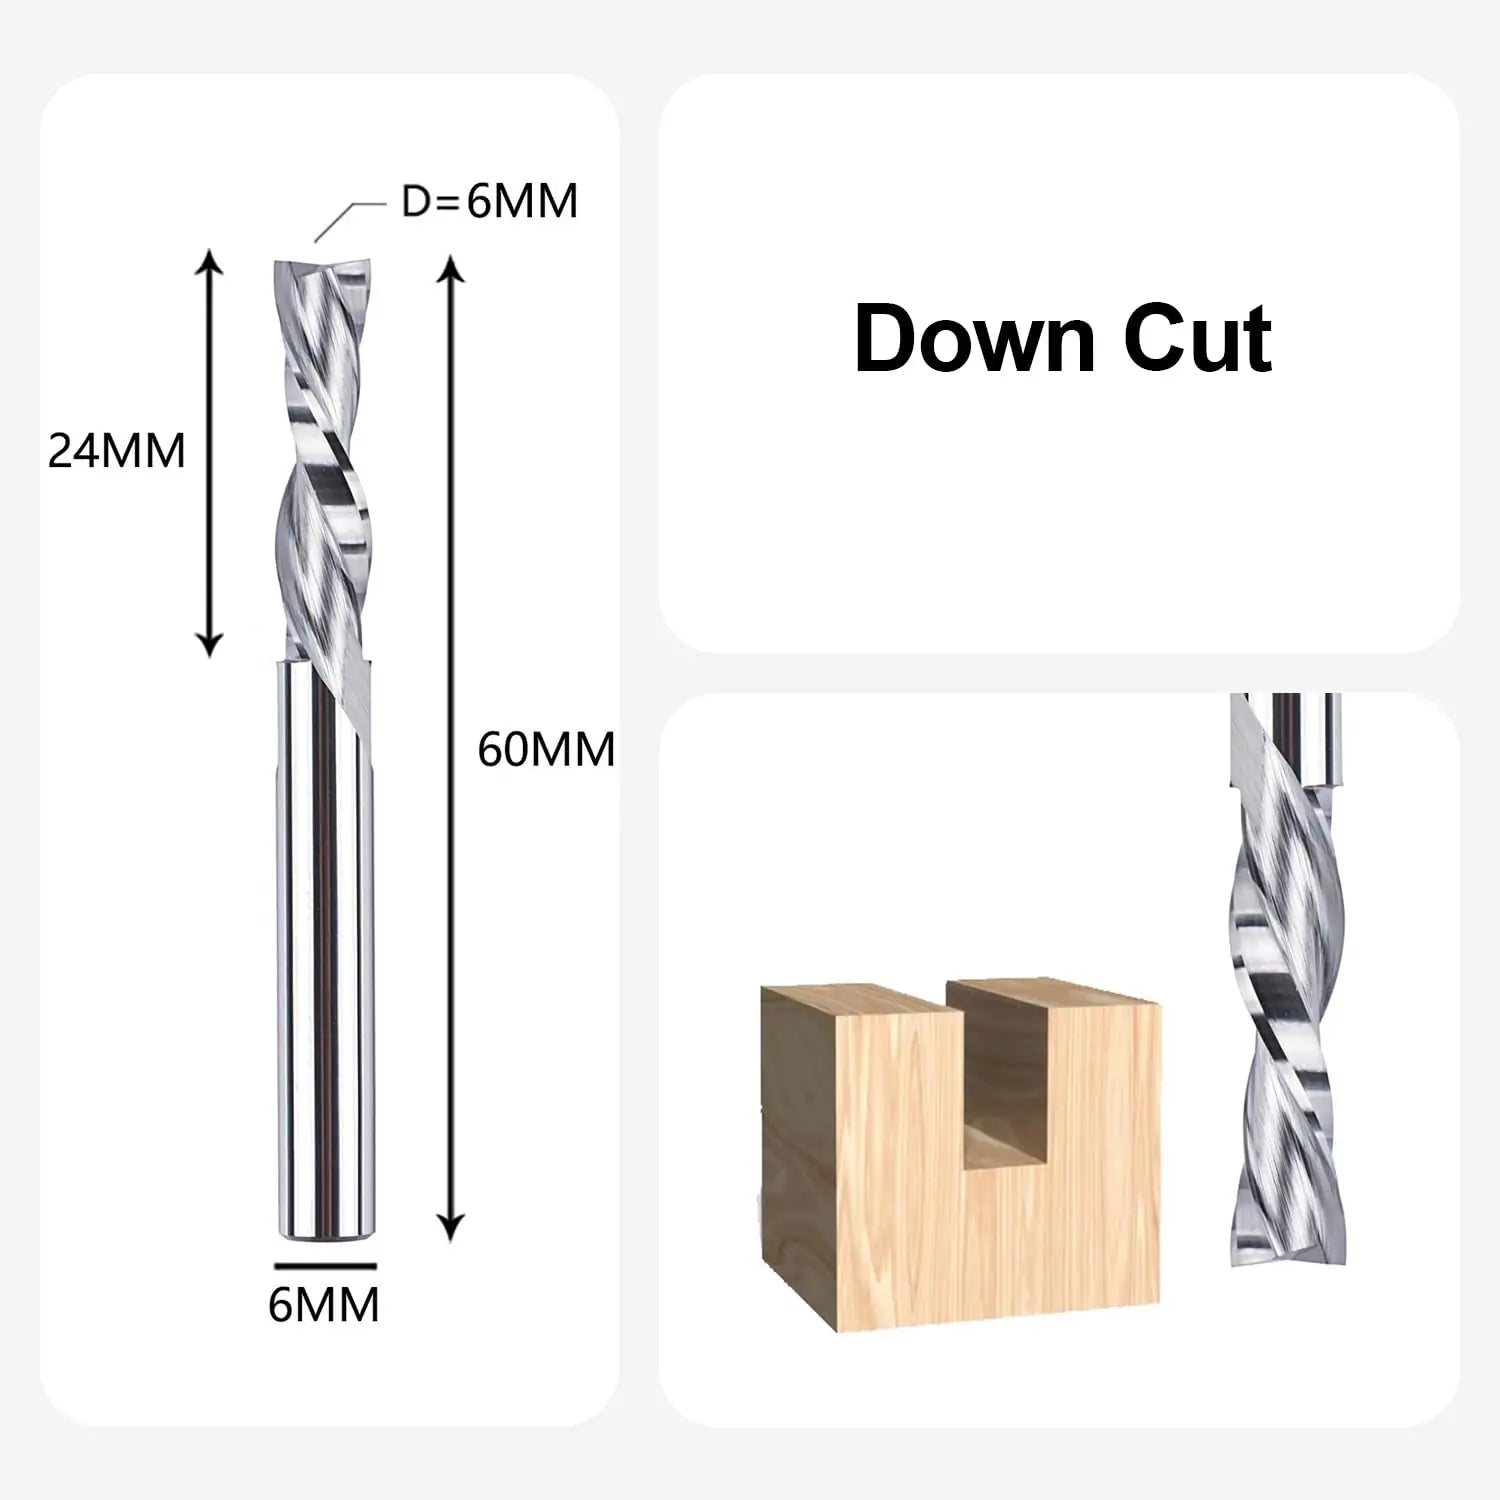 SpeTool UK 6 mm Shank Spiral Router Bit Down Cut End Mill 6 mm Cutting Diameter 24 mm Cutting Length 60 mm Total Length HRC55 Solid Carbide CNC Router Bits for Wood Carving Woodworking